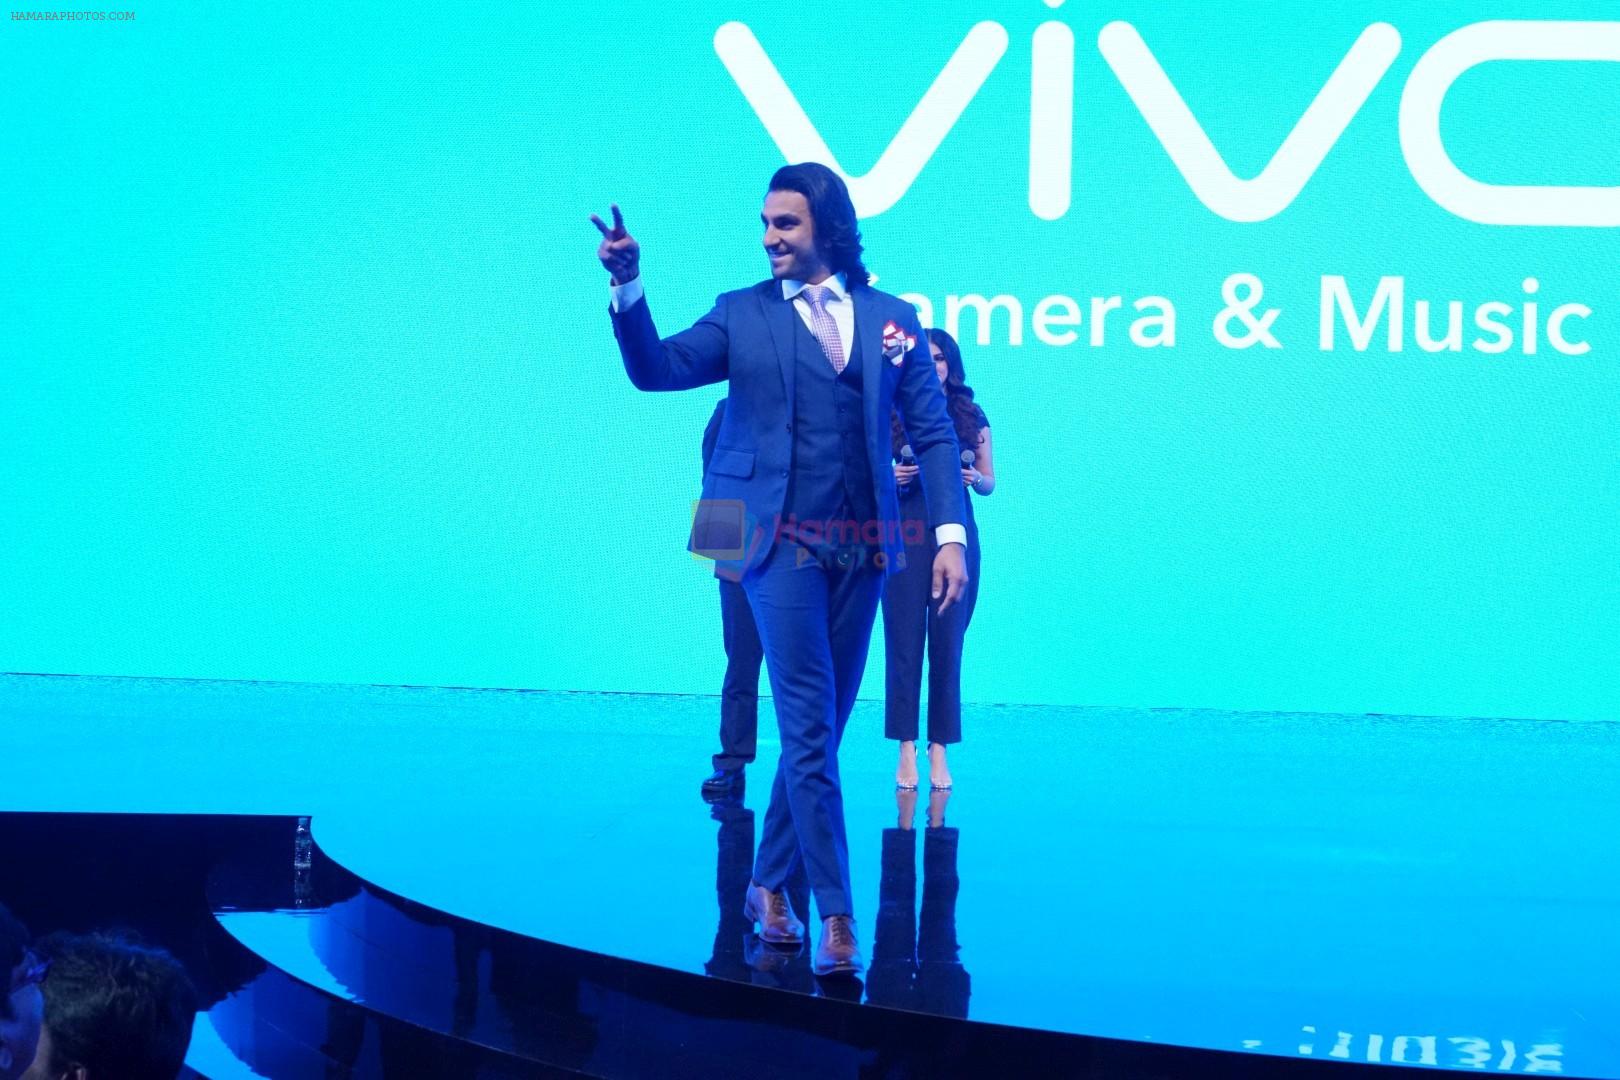 Ranveer Singh at the Launch Of Vivo V7+ Flagship Device on 7th Sept 2017